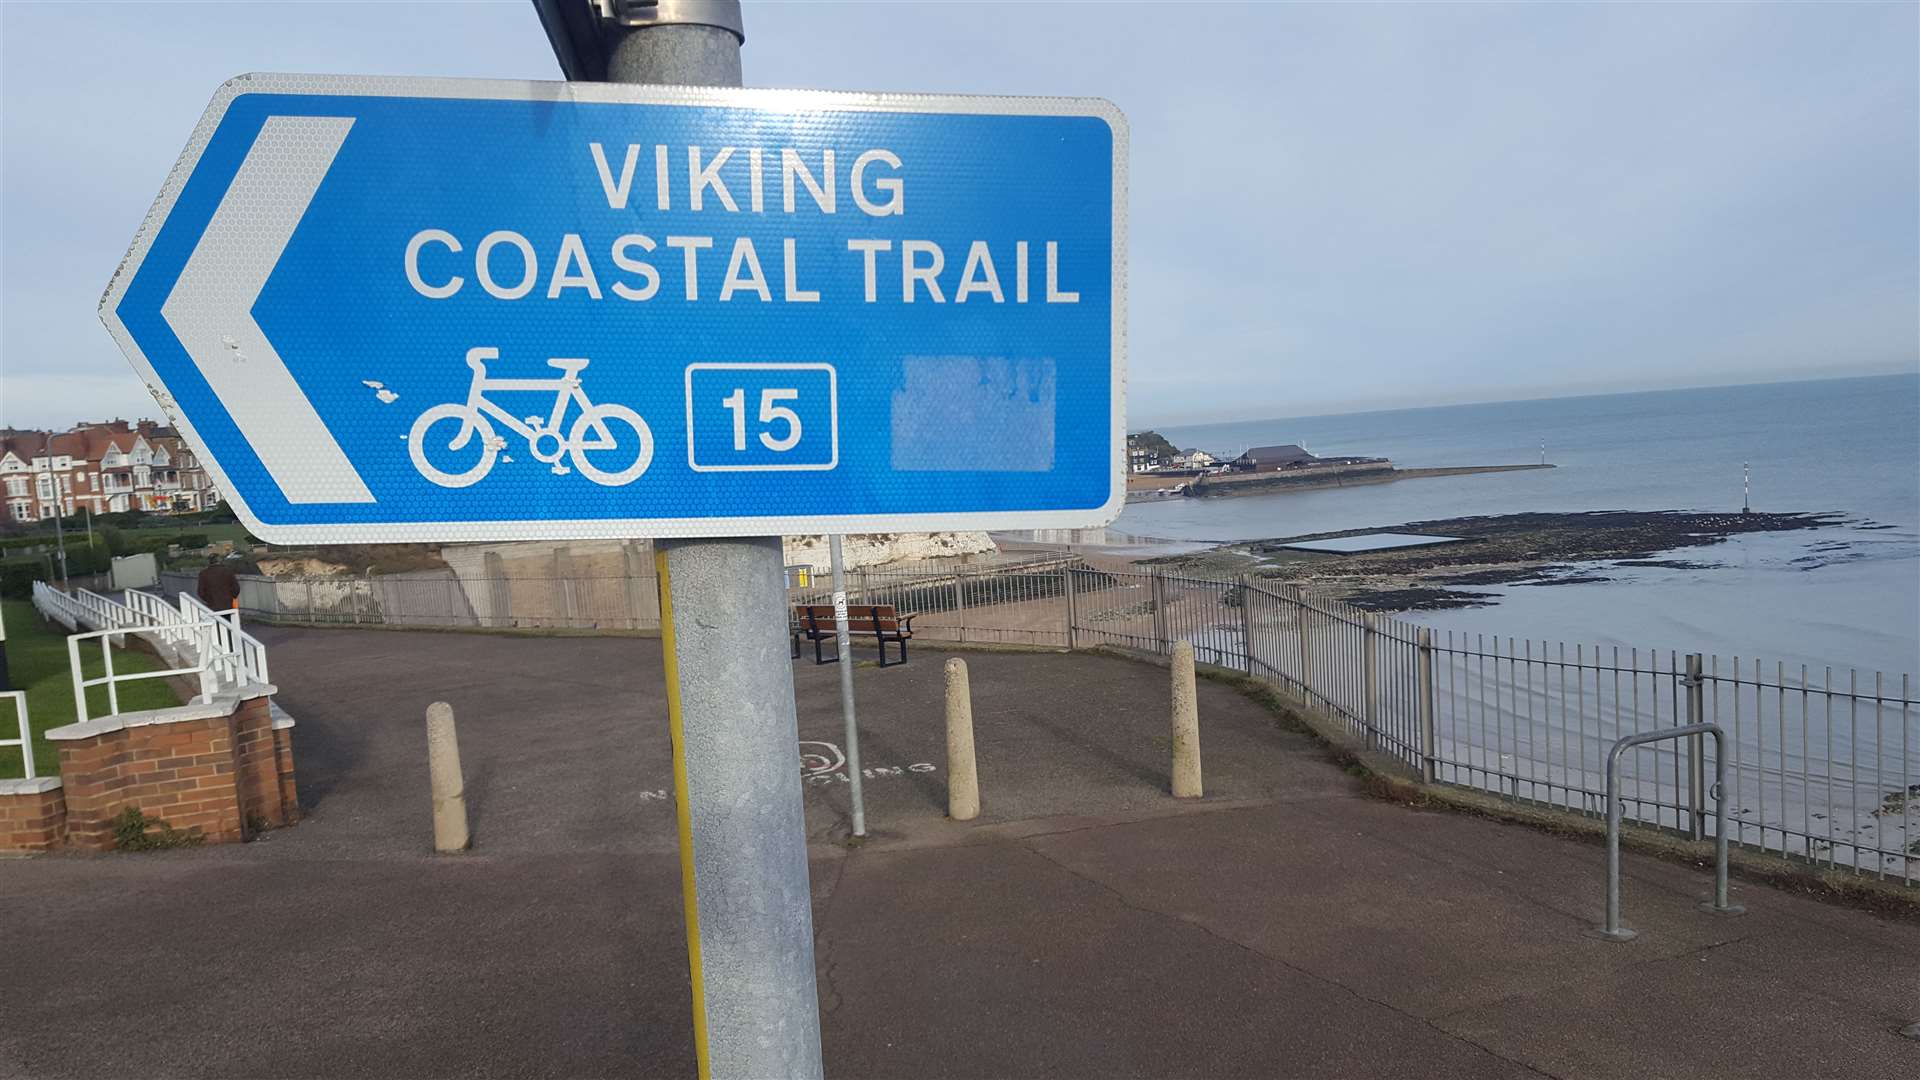 The Viking Coastal Trail is well posted along the route